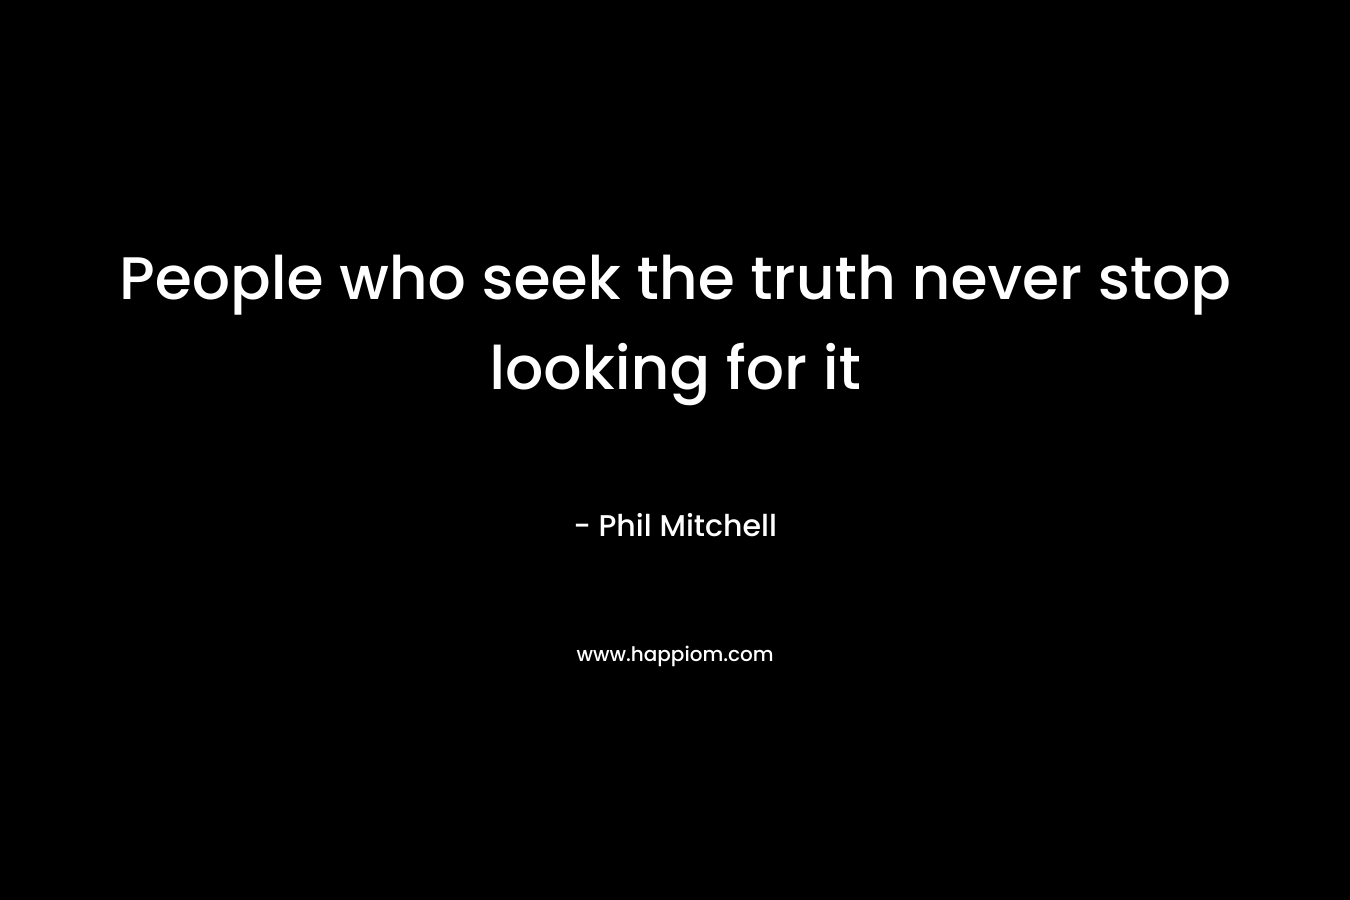 People who seek the truth never stop looking for it